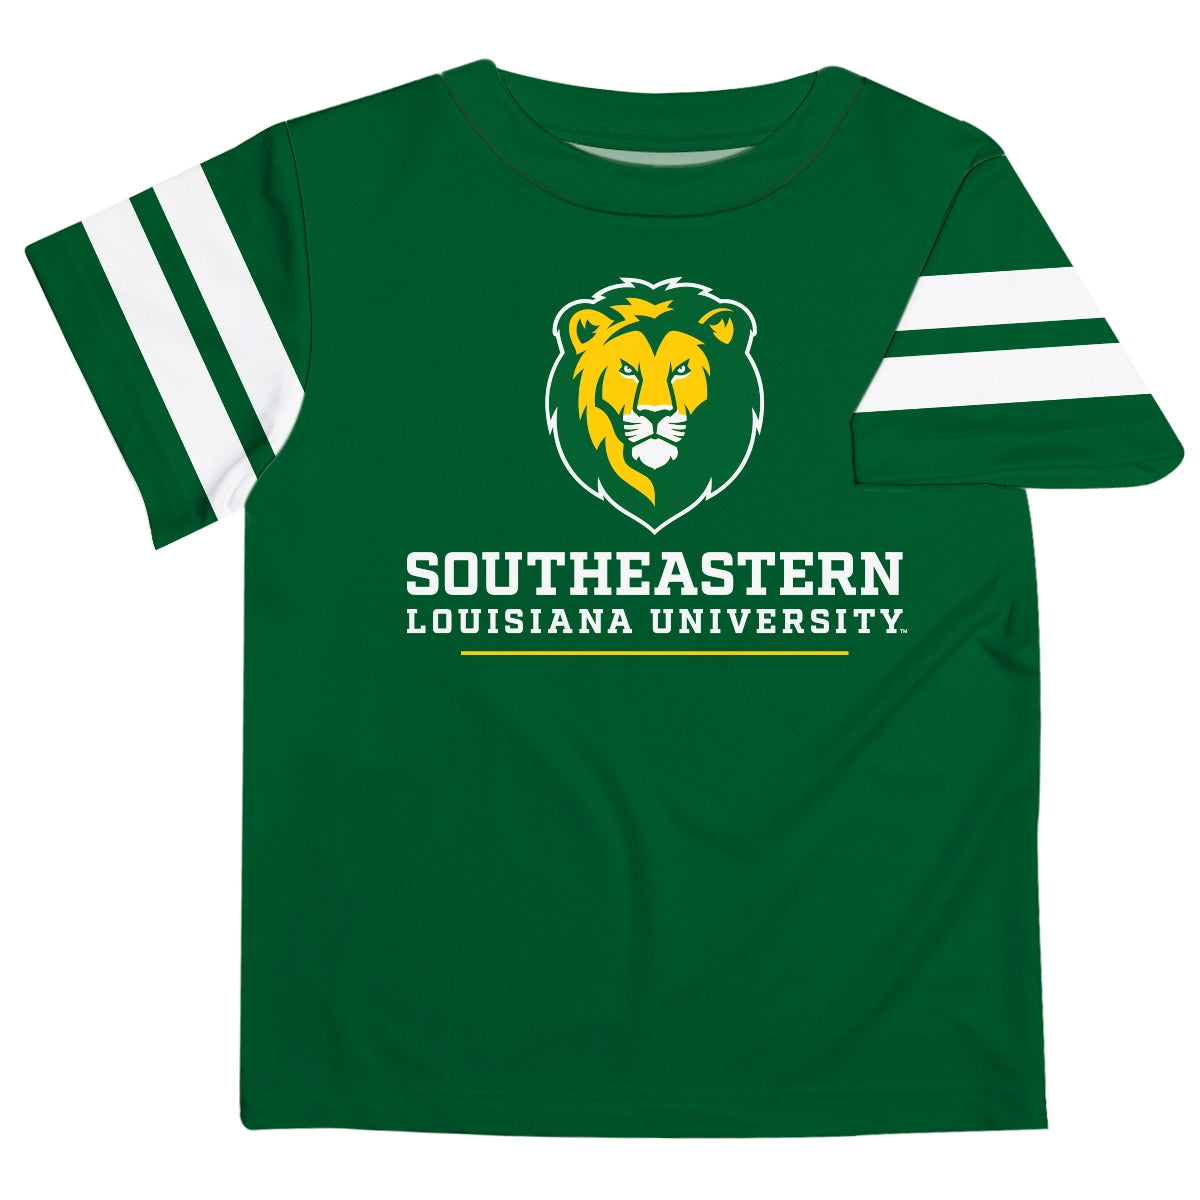 A Southeastern Louisiana Lions green t-shirt with stripes on sleeve by Vive La Fete.